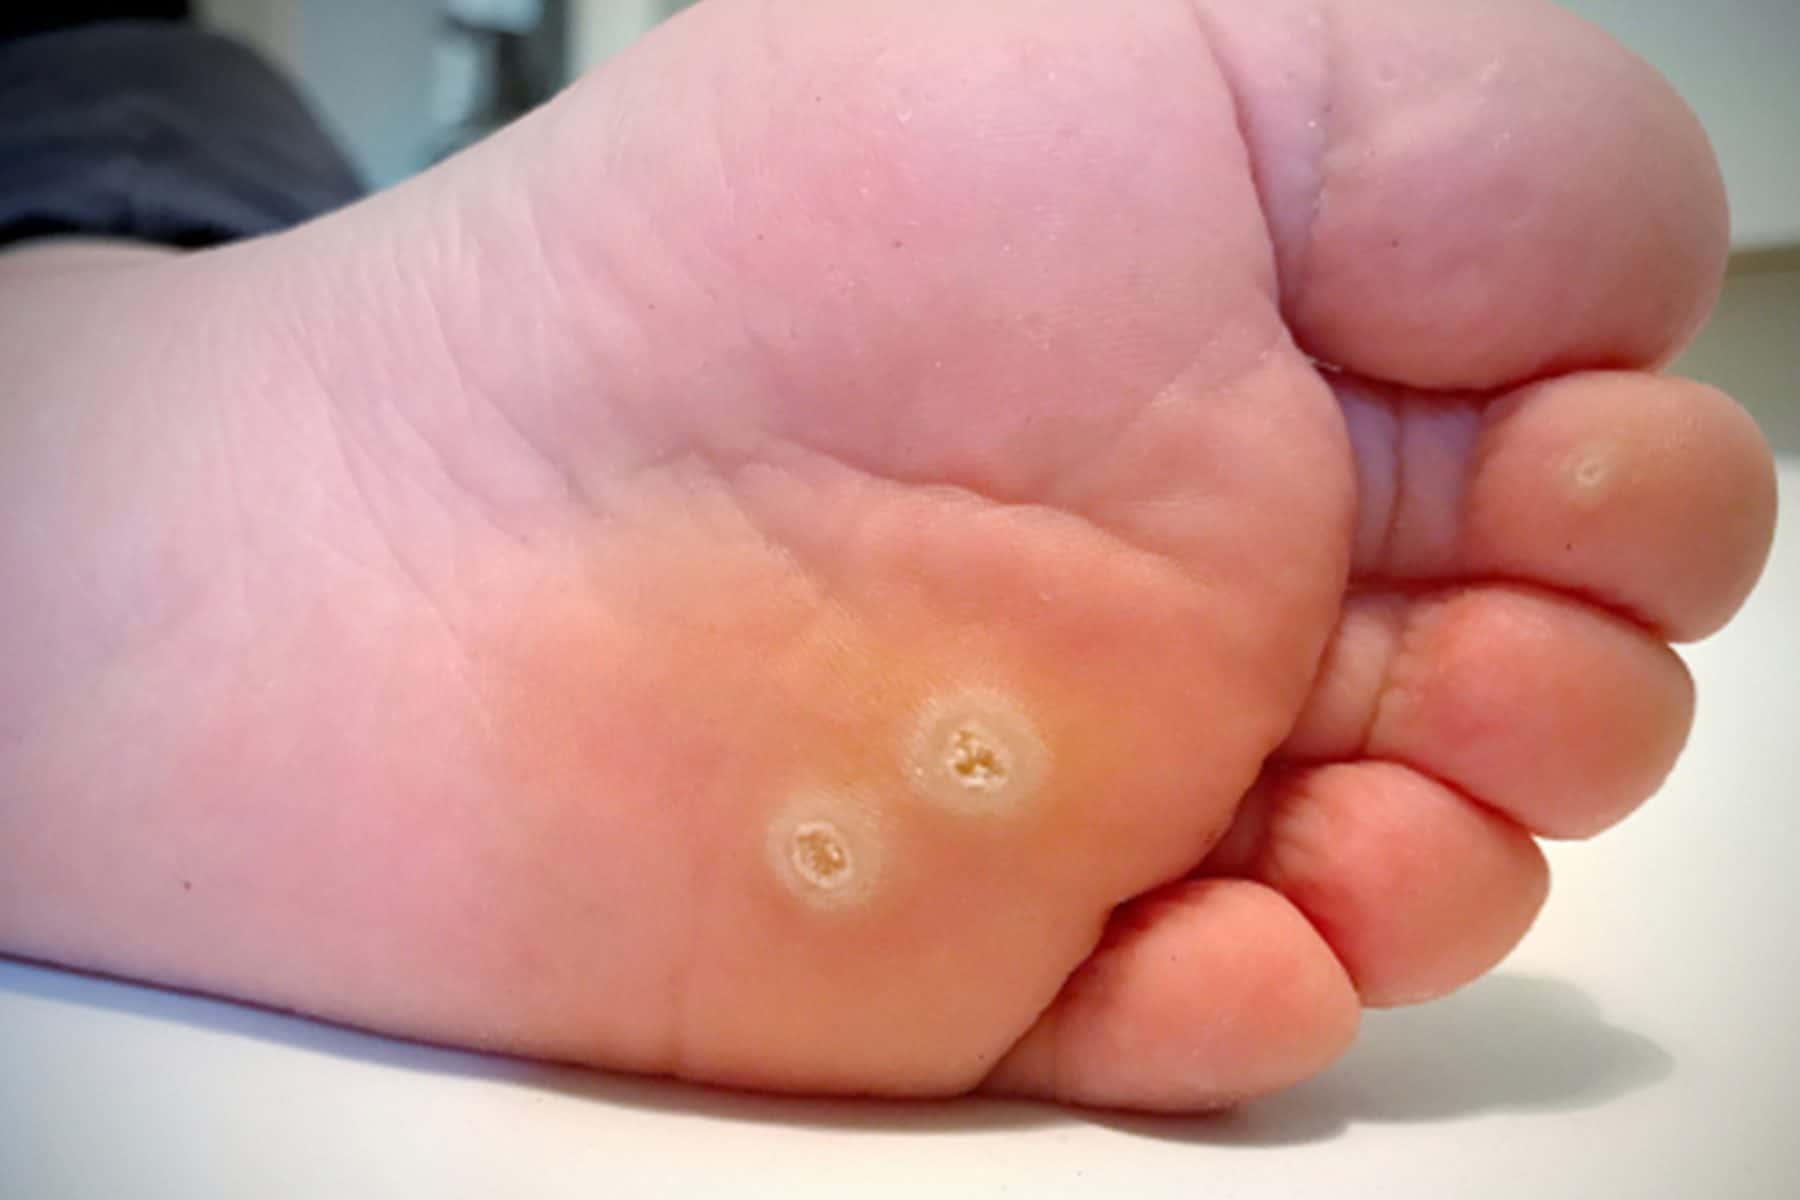 wart under foot removal